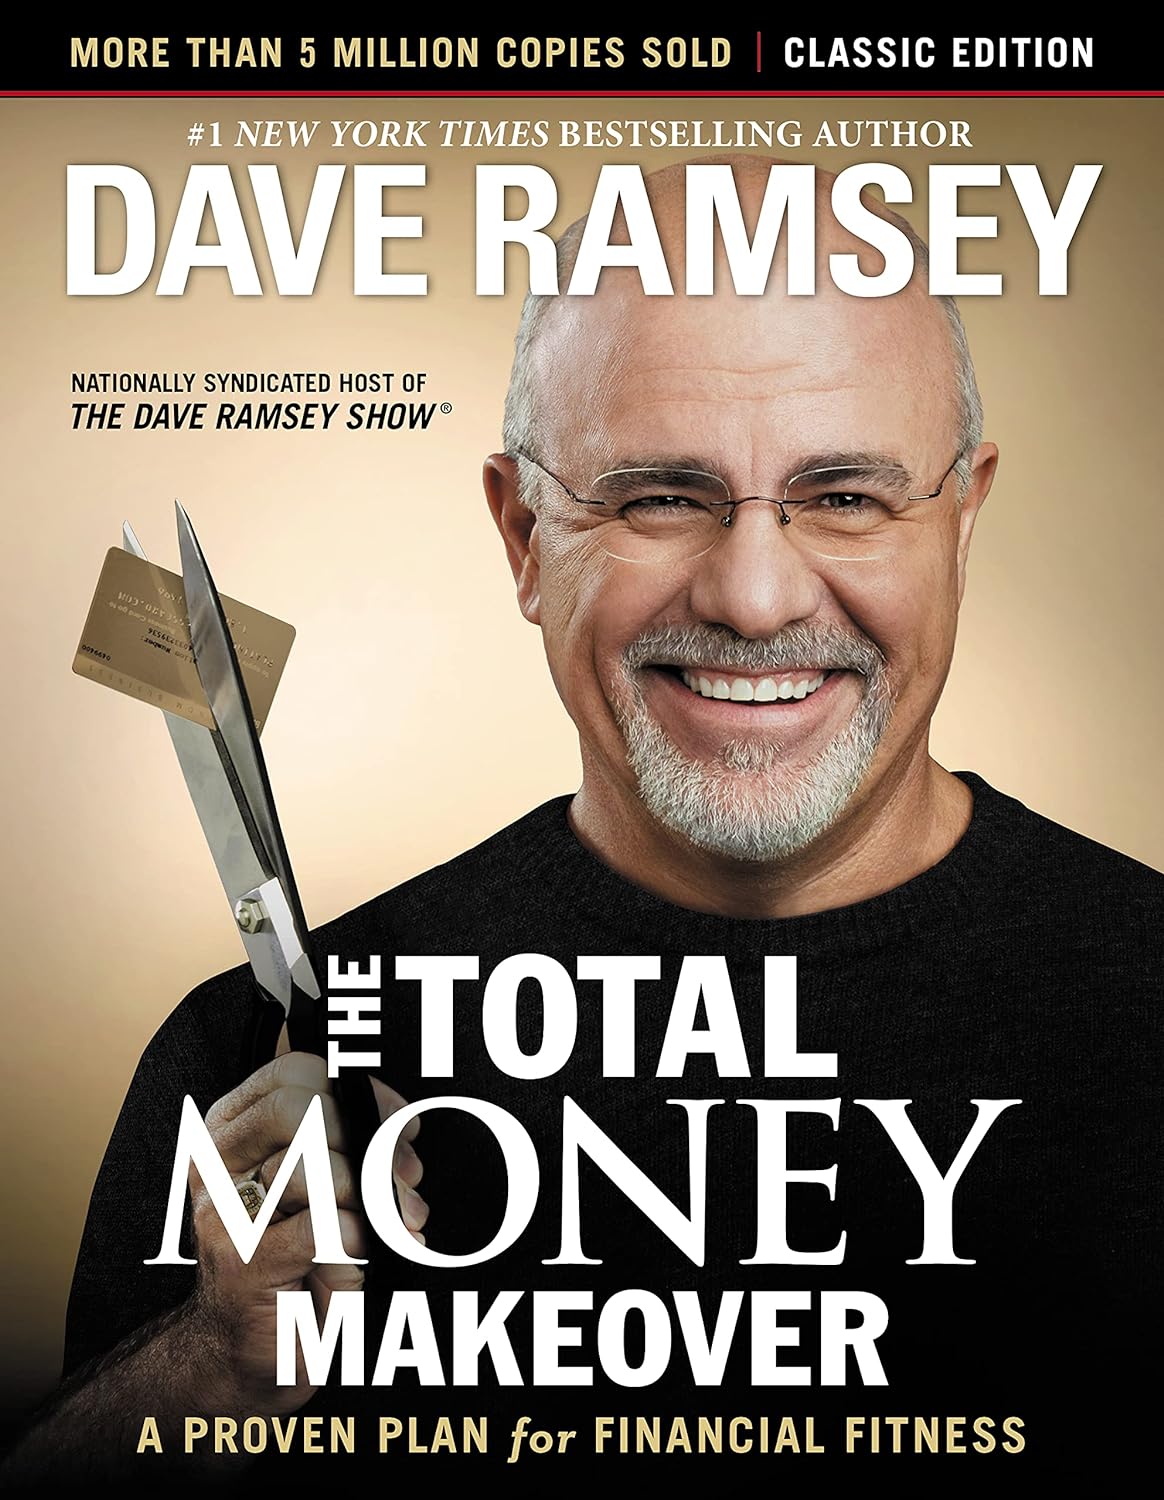 The Total Money Makeover: Classic Edition: A Proven Plan for Financial Fitness, by Dave Ramsey